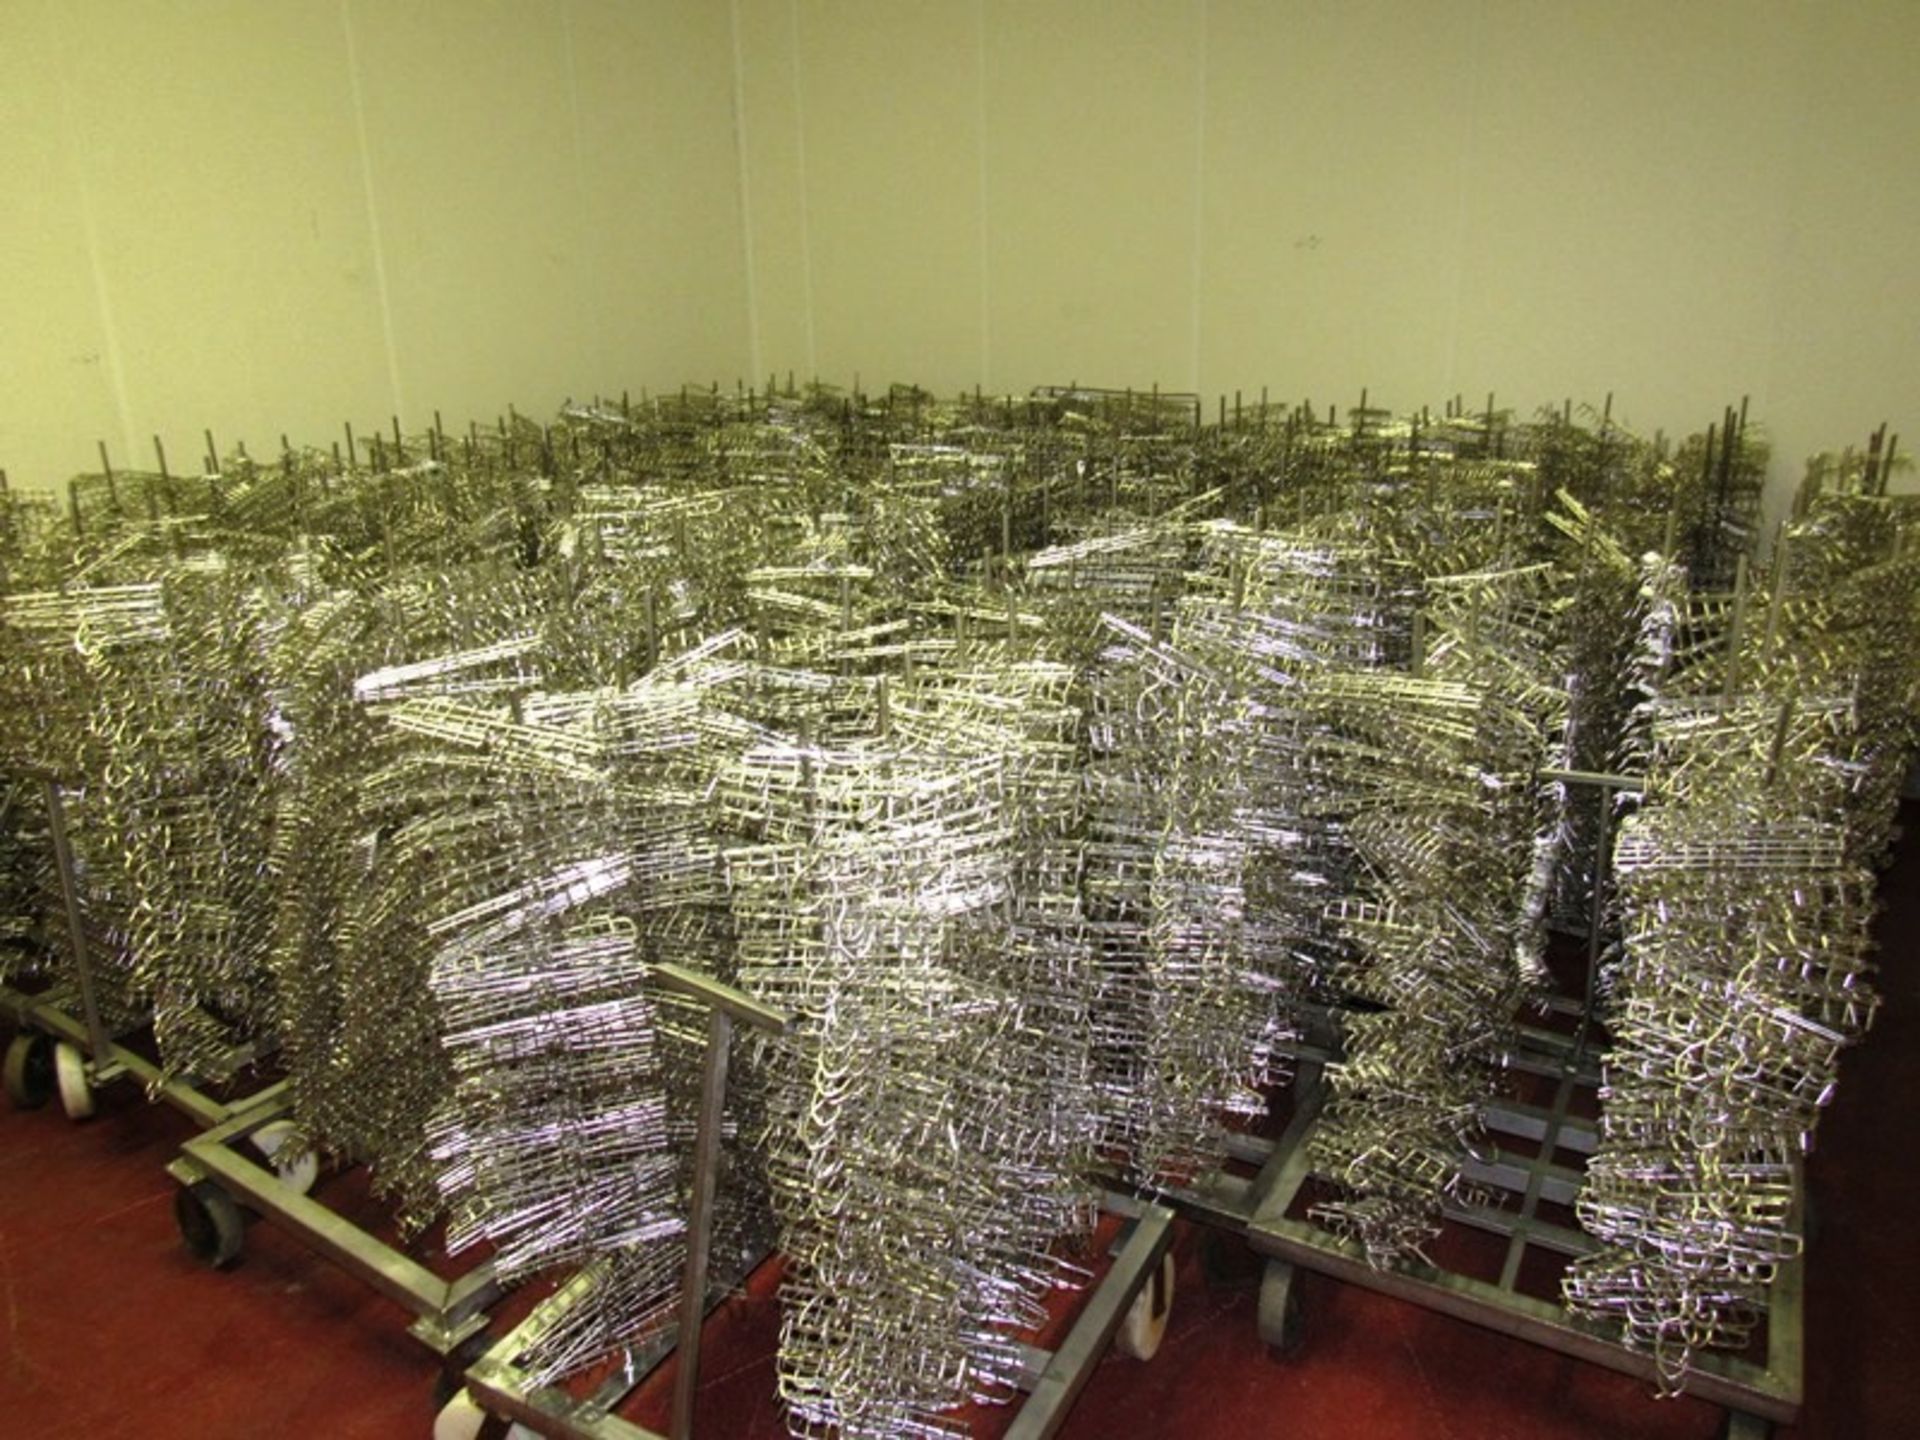 Lot (600) Stainless Steel Bacon Combs, 8 prong on 2 carts ($25.00 Required Loading Fee- Rigger: